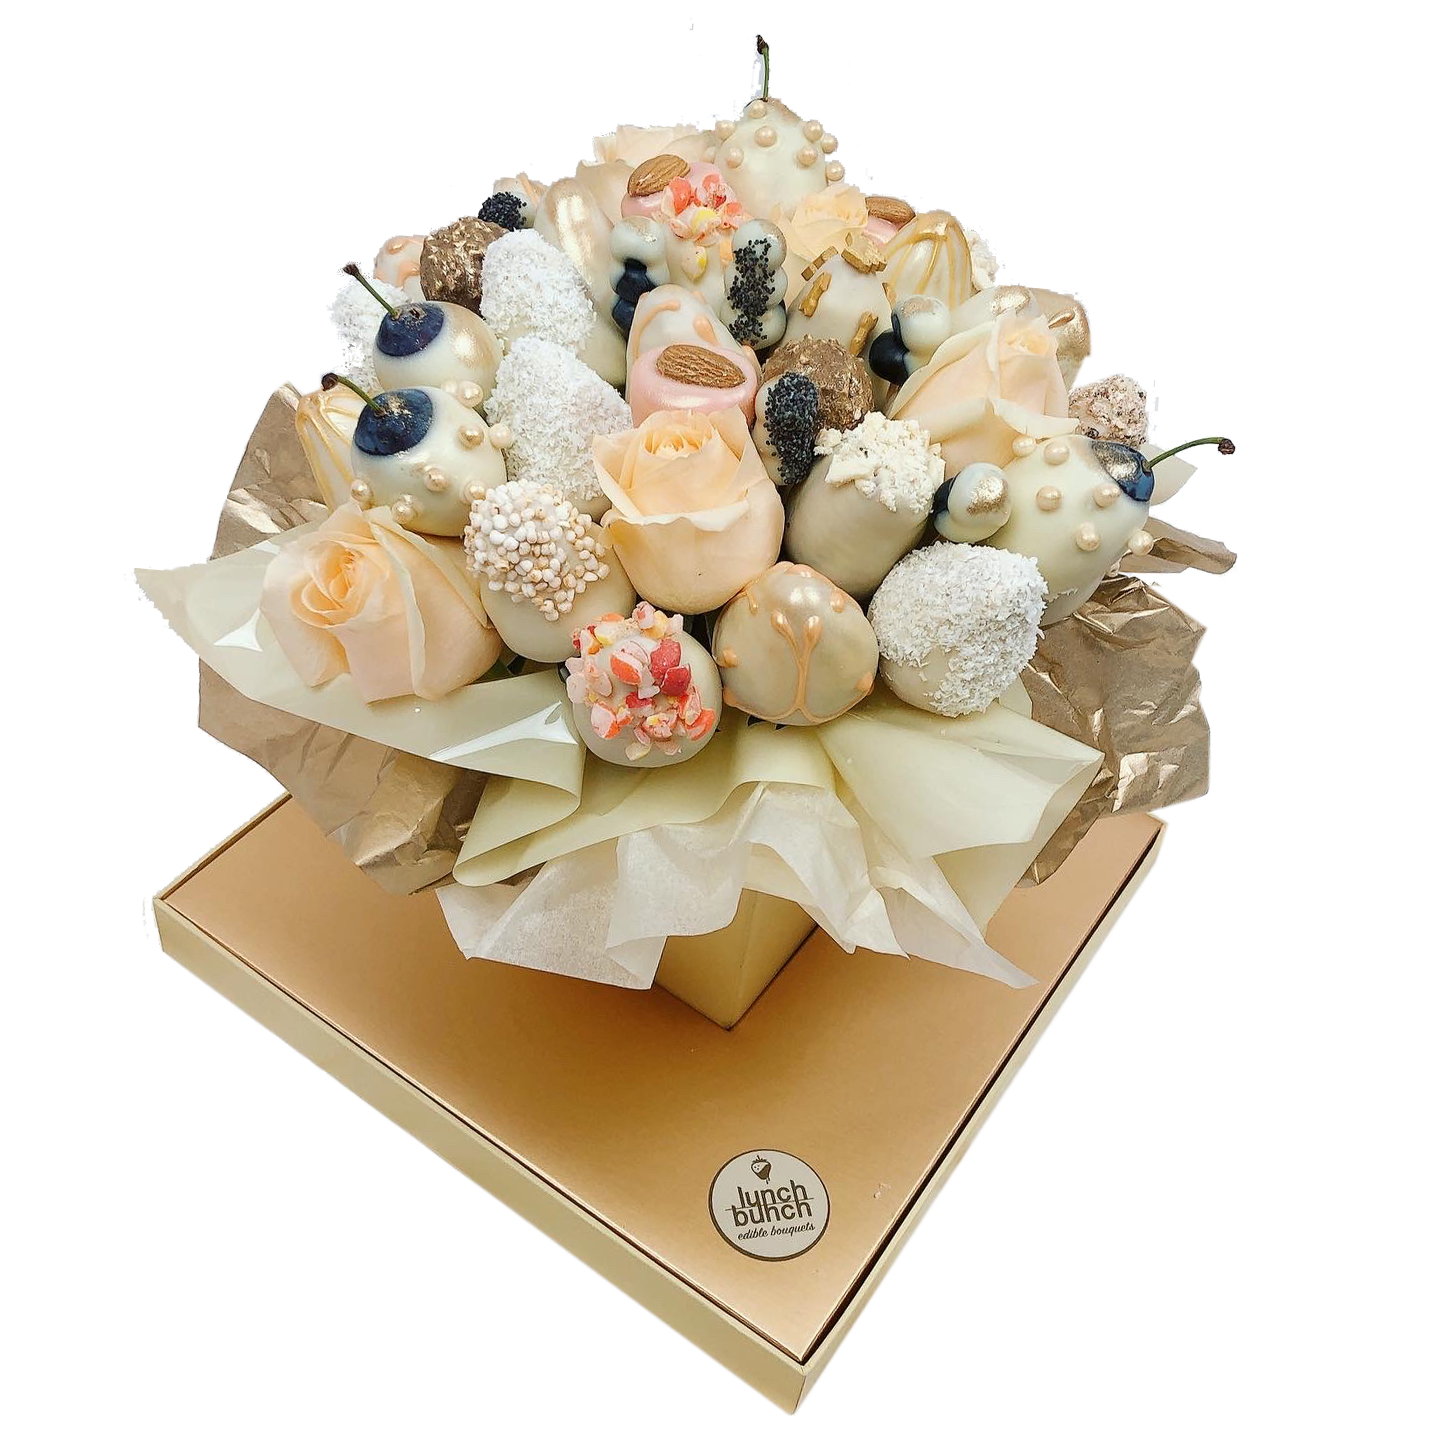 Engagement Gift, chocolate strawberries Bouquet, Romantig gift, engagement present, white chocolate bouquet, dessert gift adelaide delivery